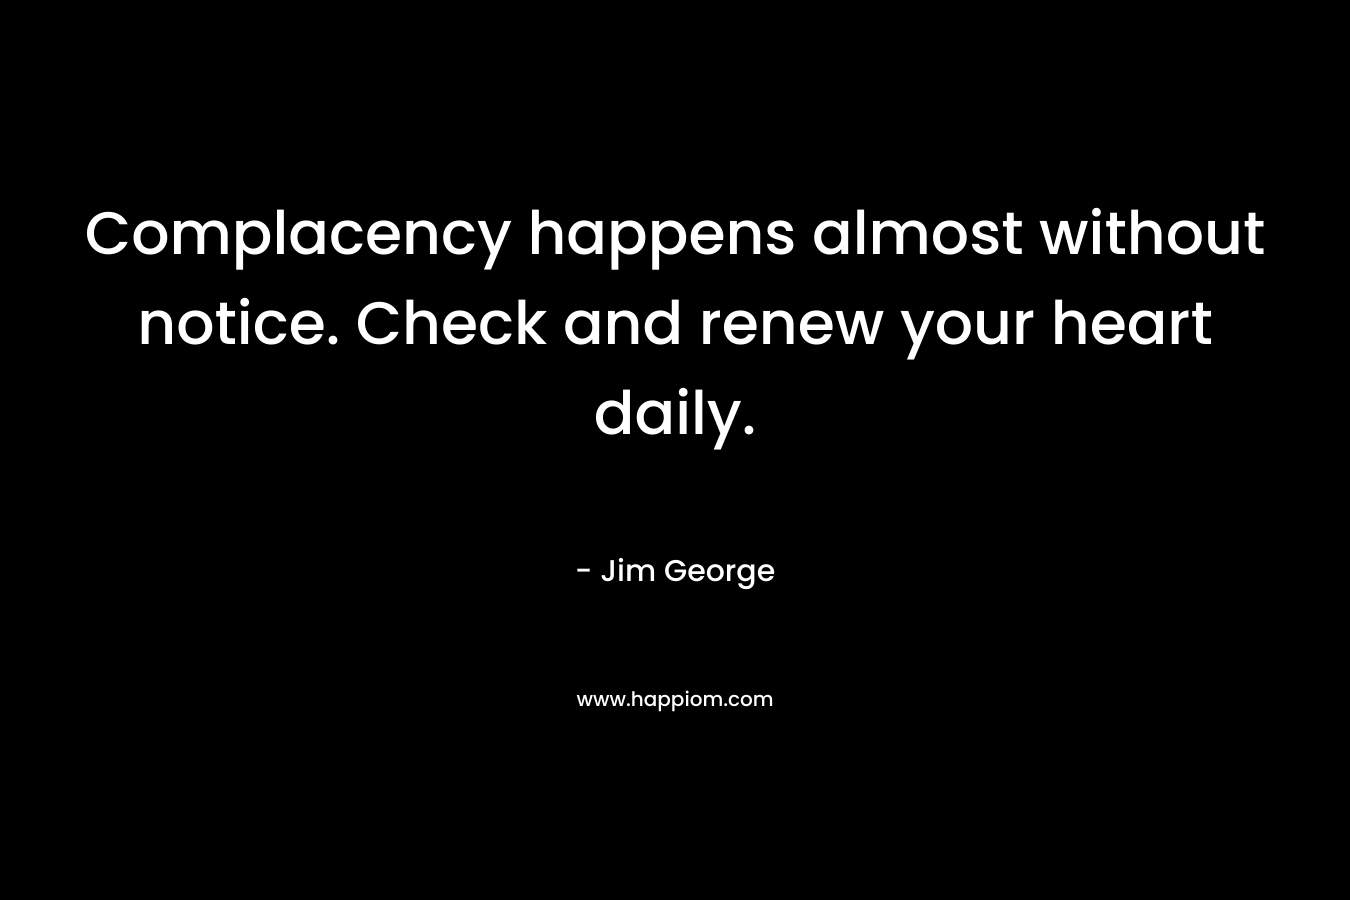 Complacency happens almost without notice. Check and renew your heart daily. – Jim George